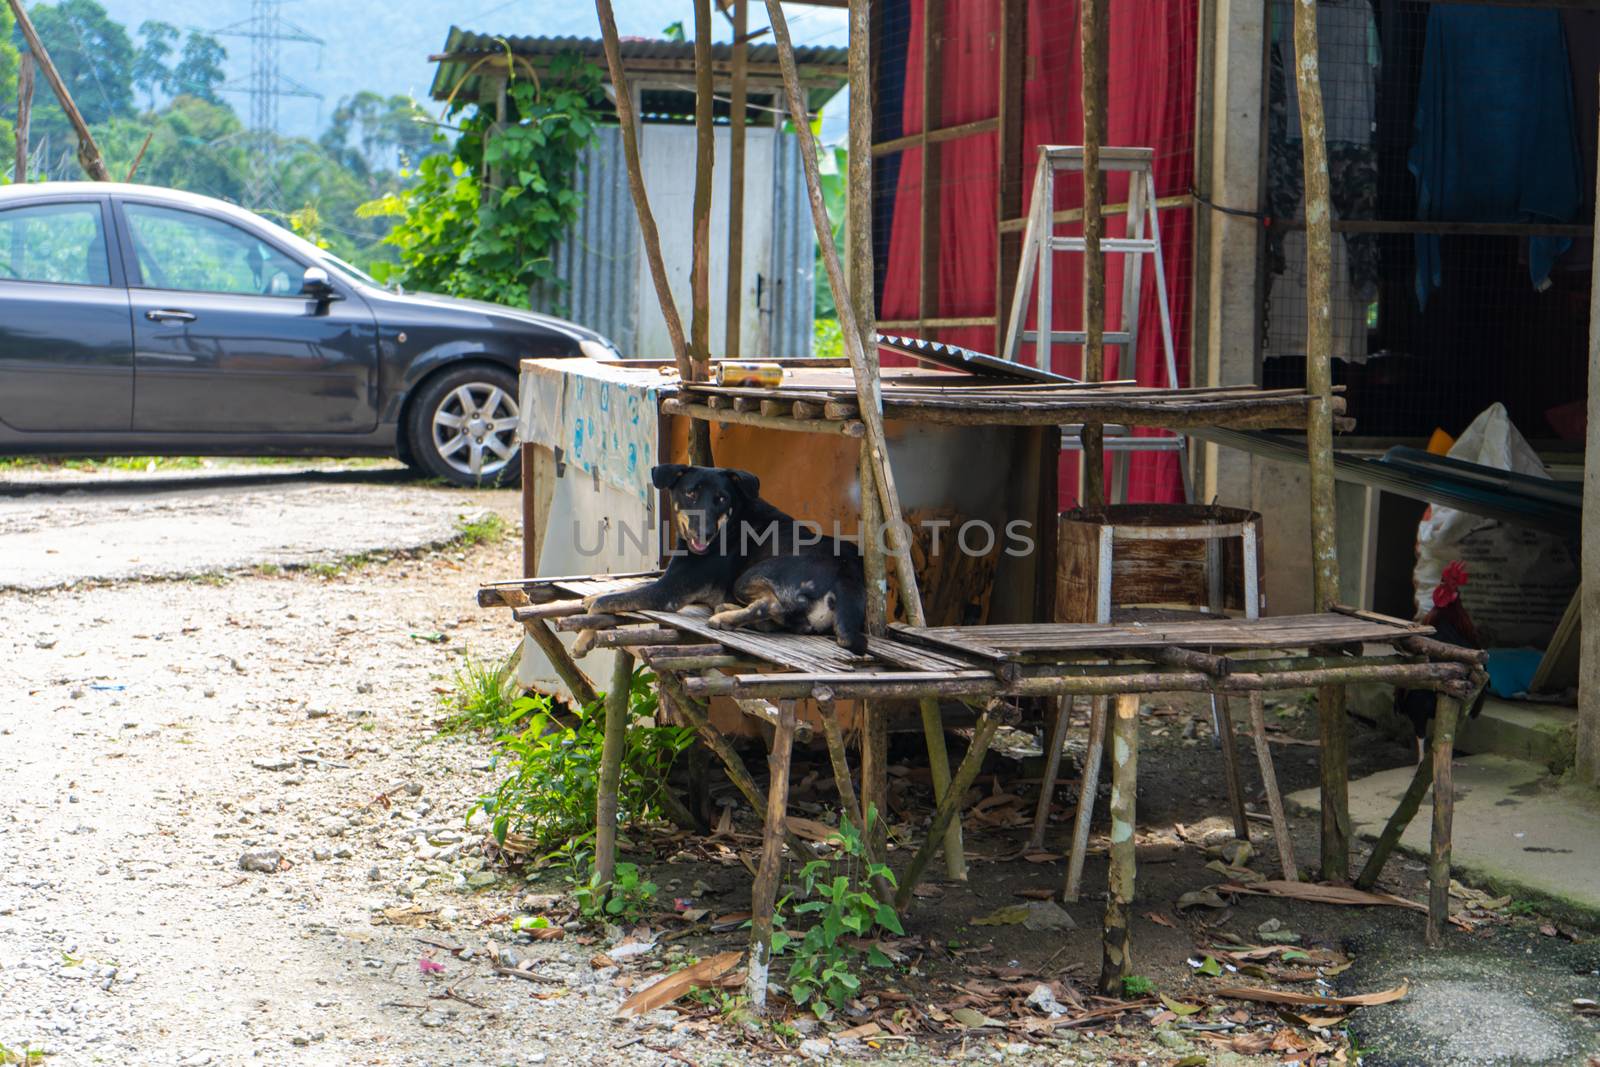 A house on the road in Asia, near the house there are empty display shelves on which pets sit